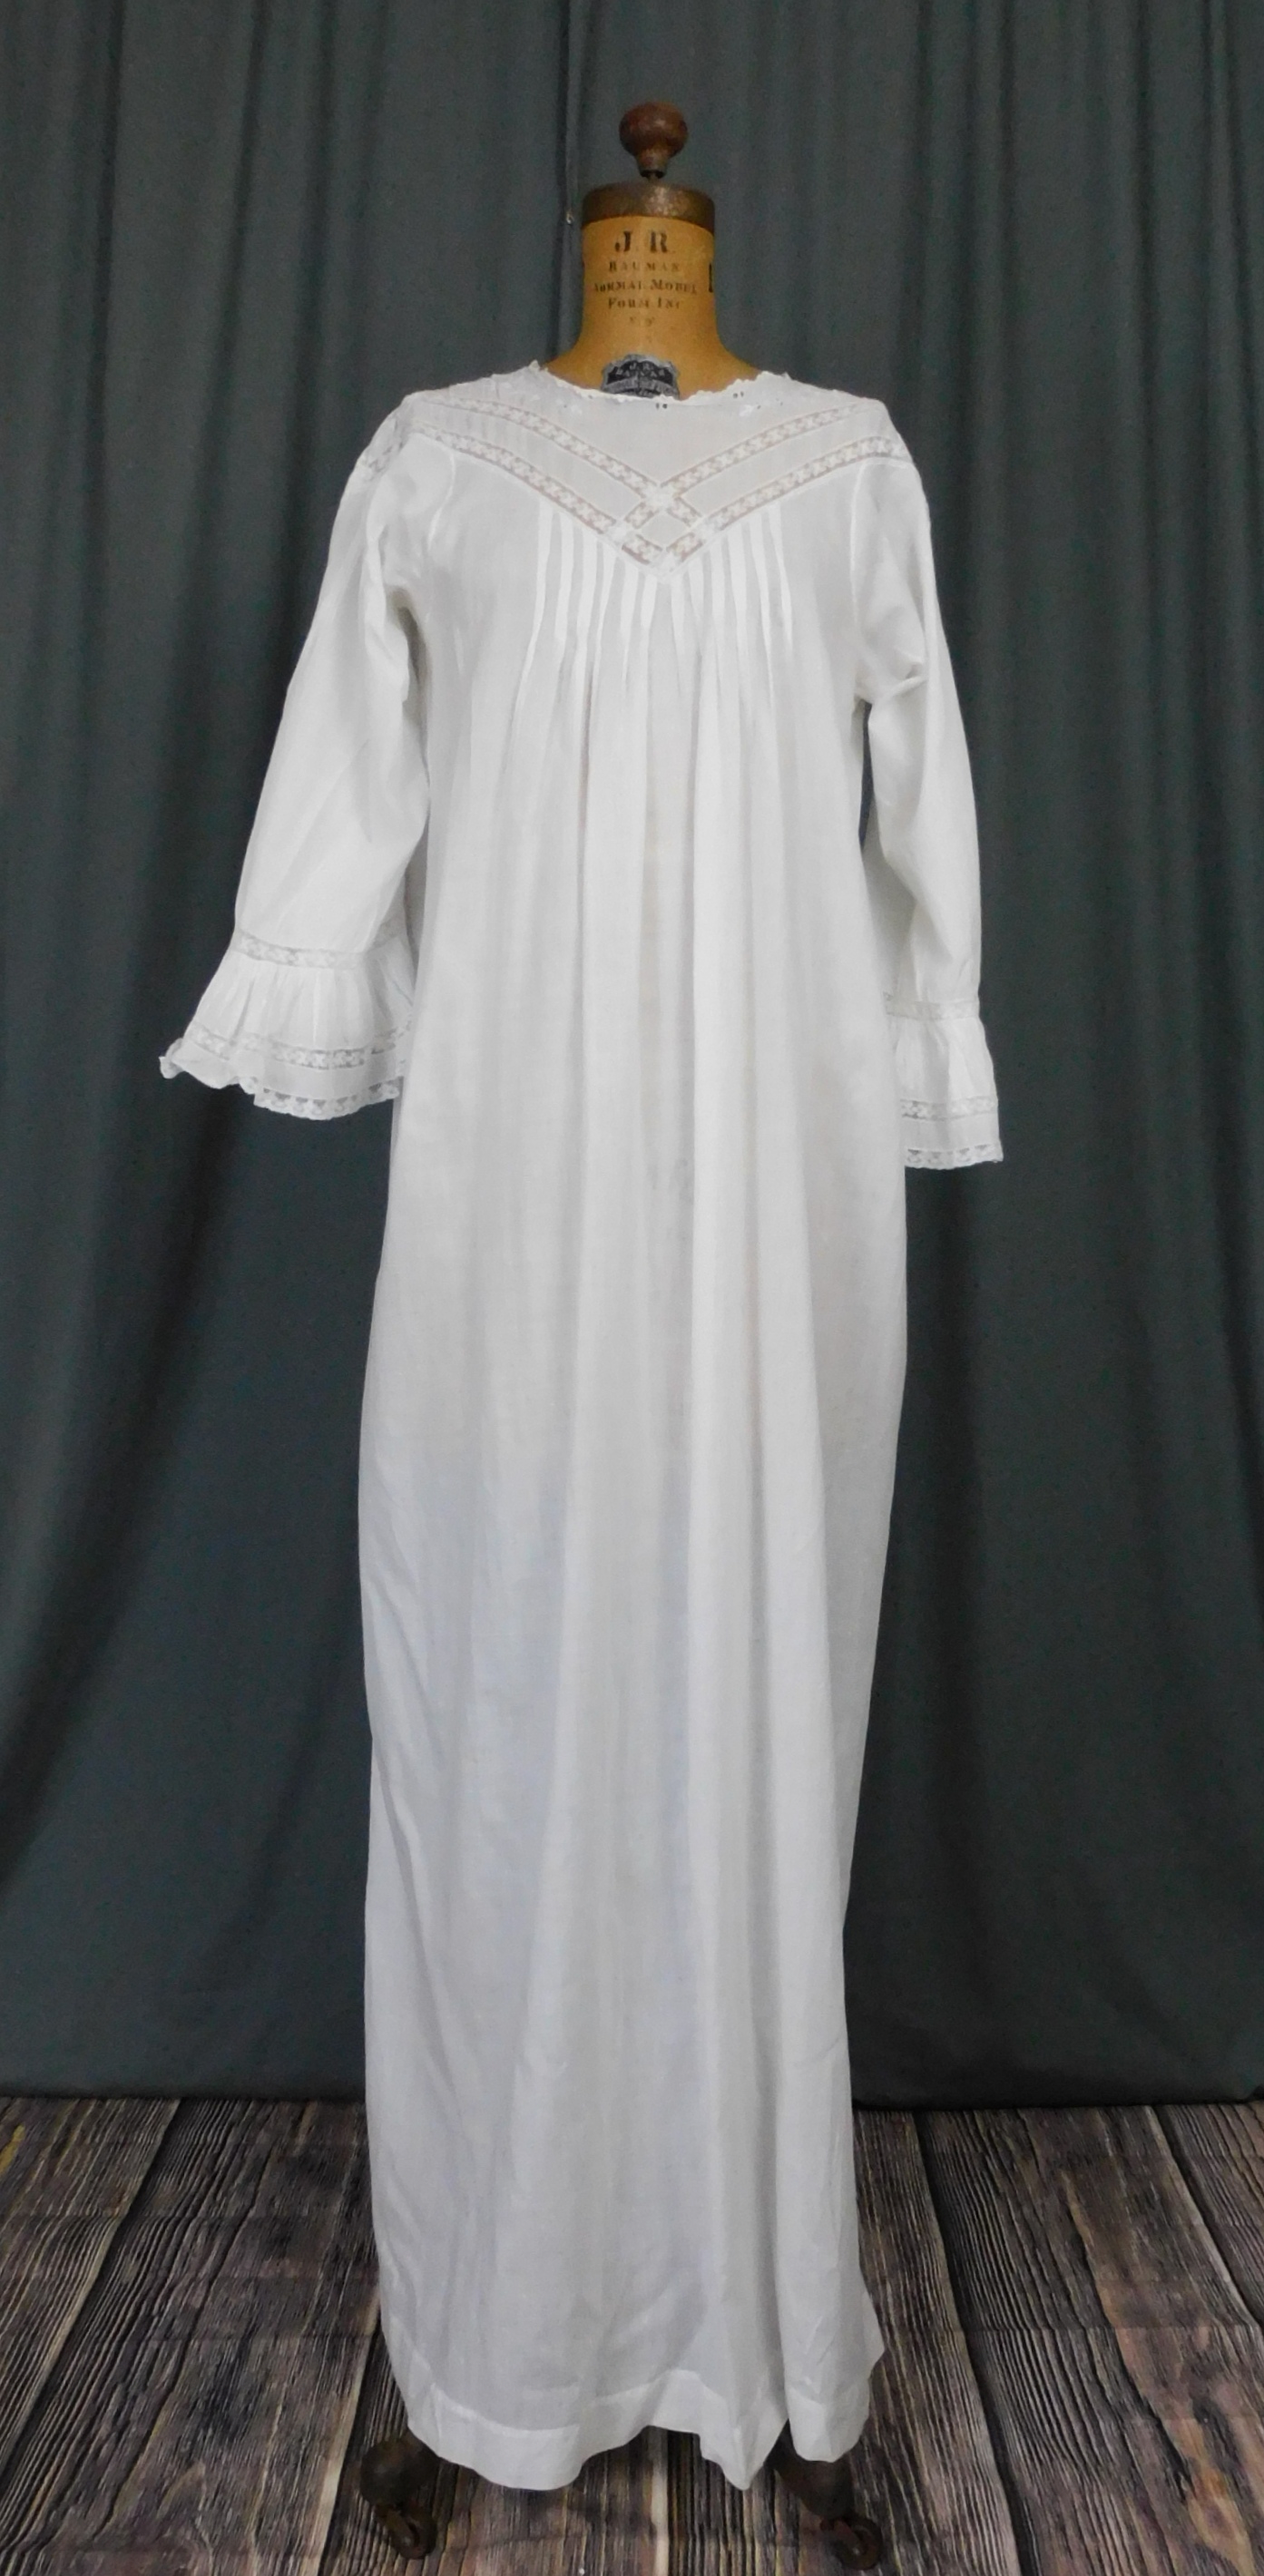 Antique Edwardian Nightgown, 1900s White Cotton with Lace, Bell Sleeves, 36 bust